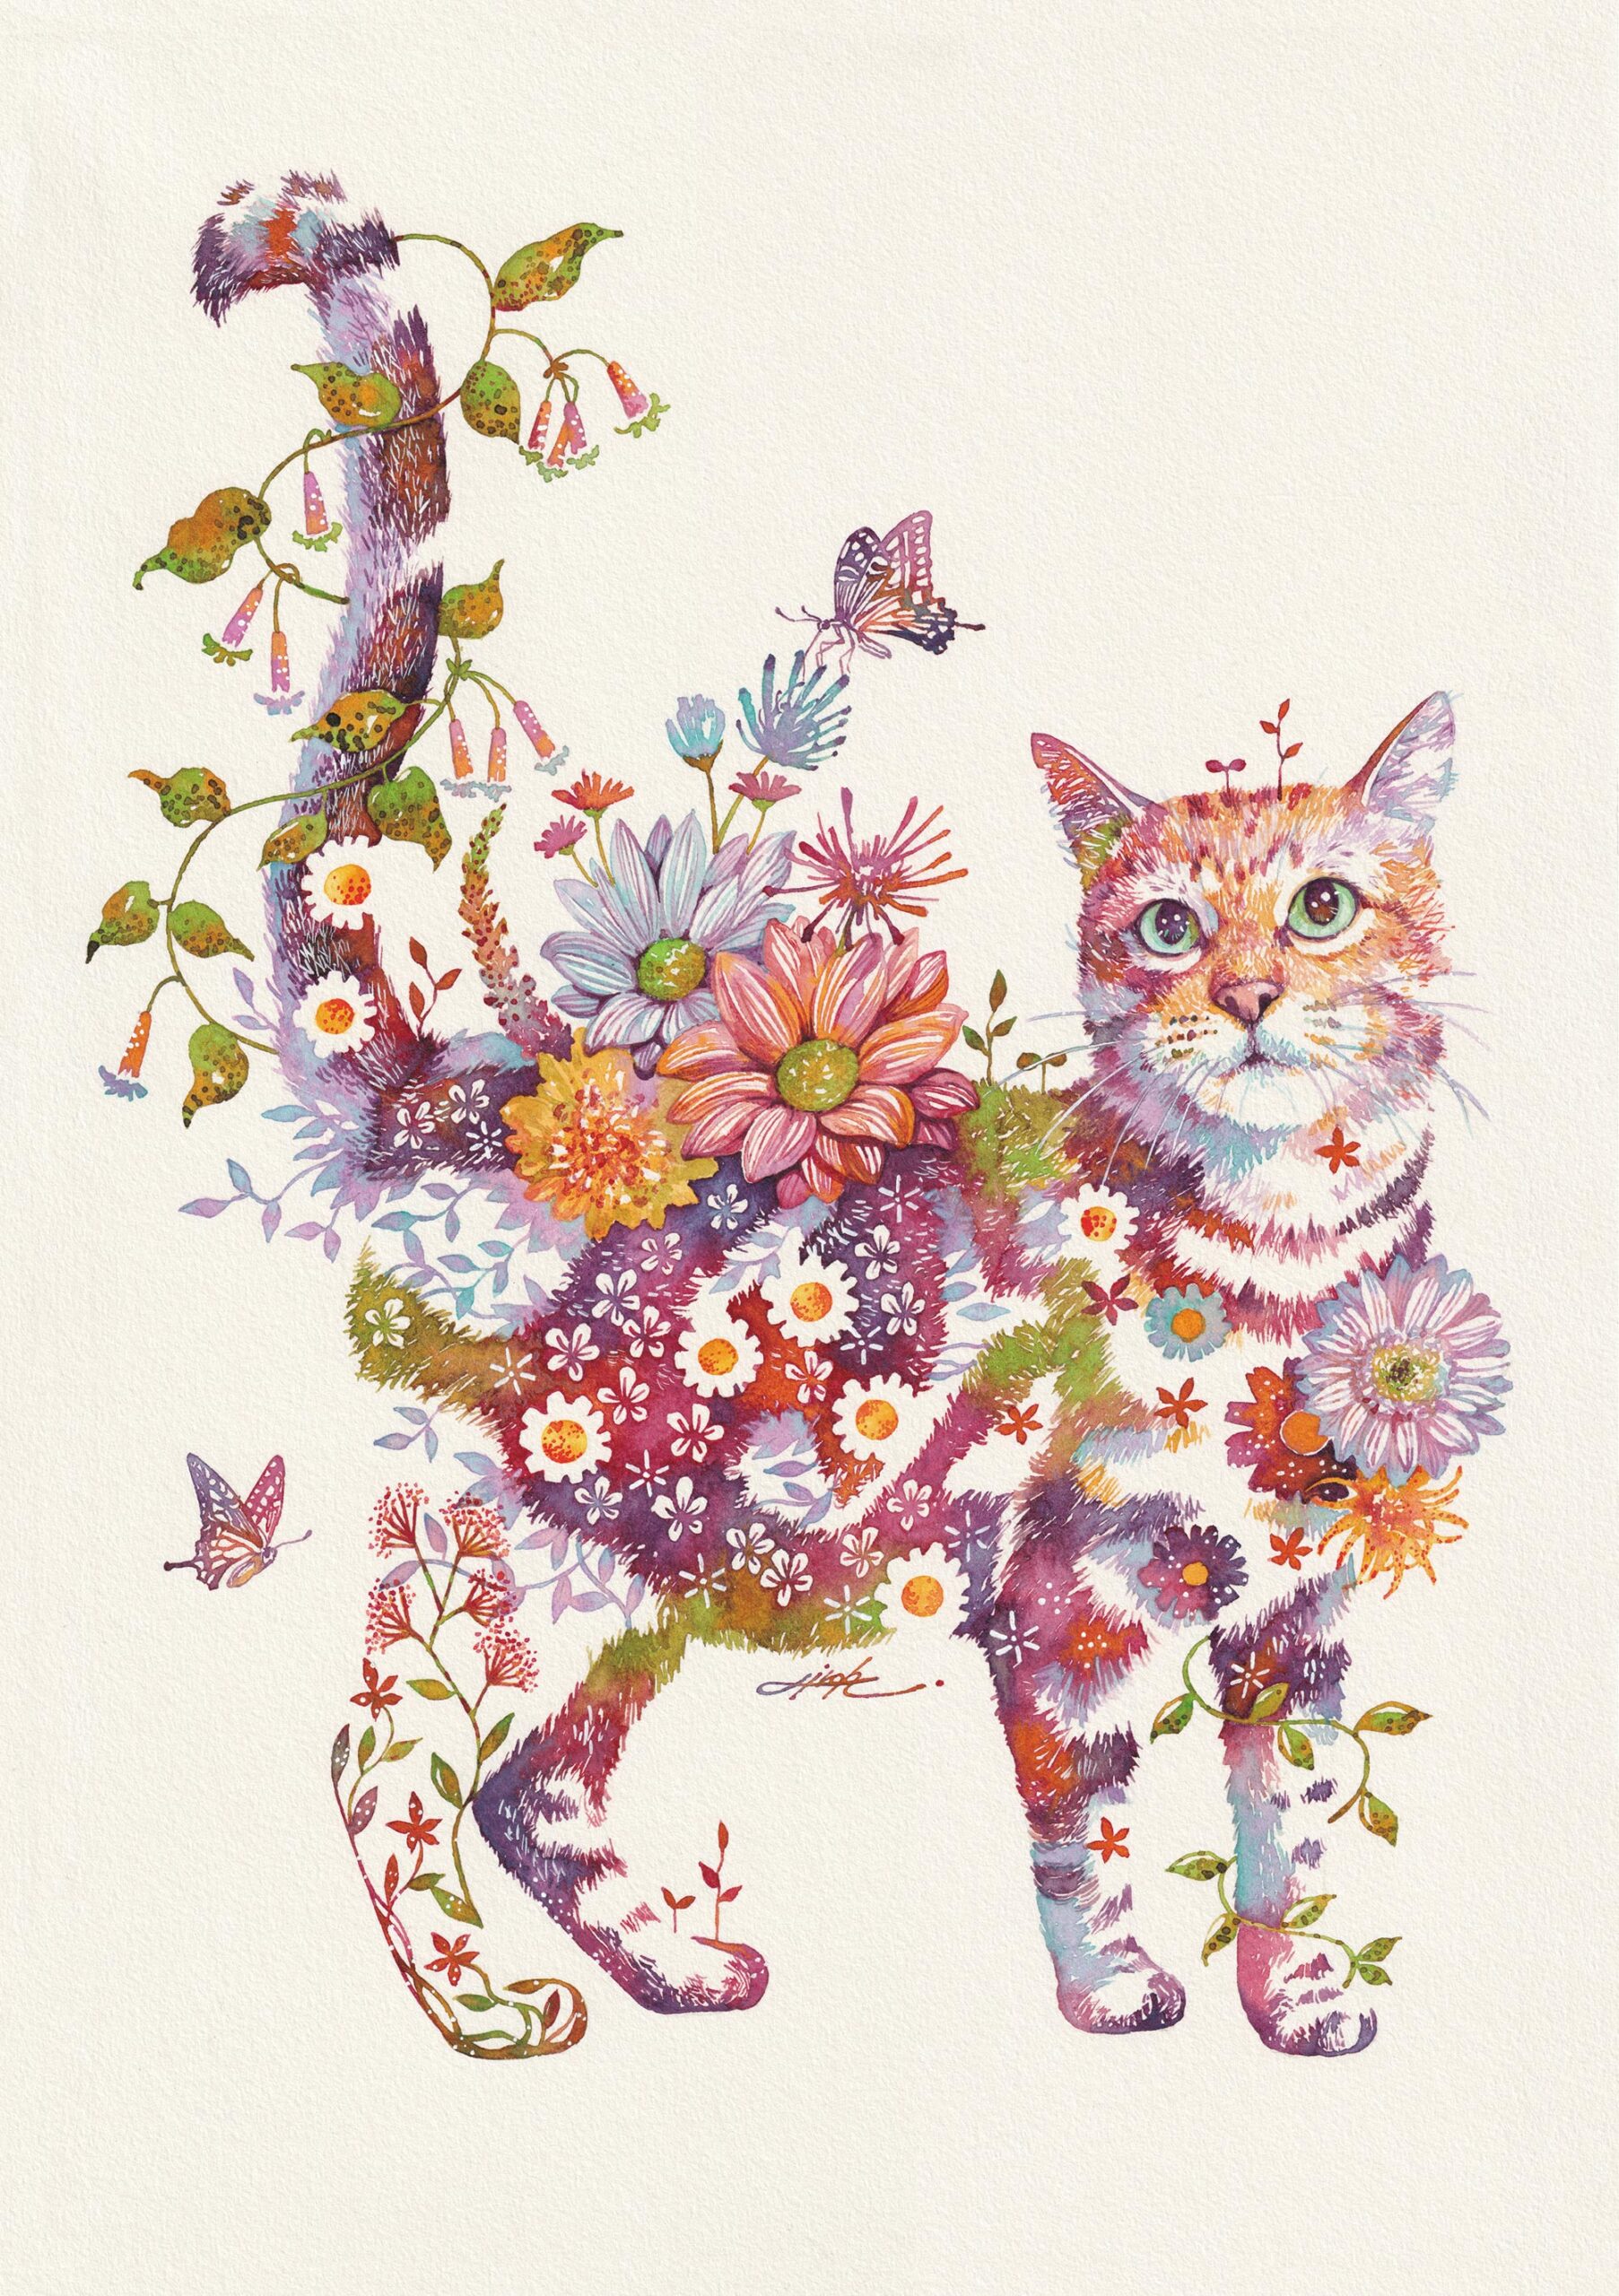 Vivid Botanicals Bloom from the Coats of Charismatic Cats in Watercolor Works by Hiroki Takeda